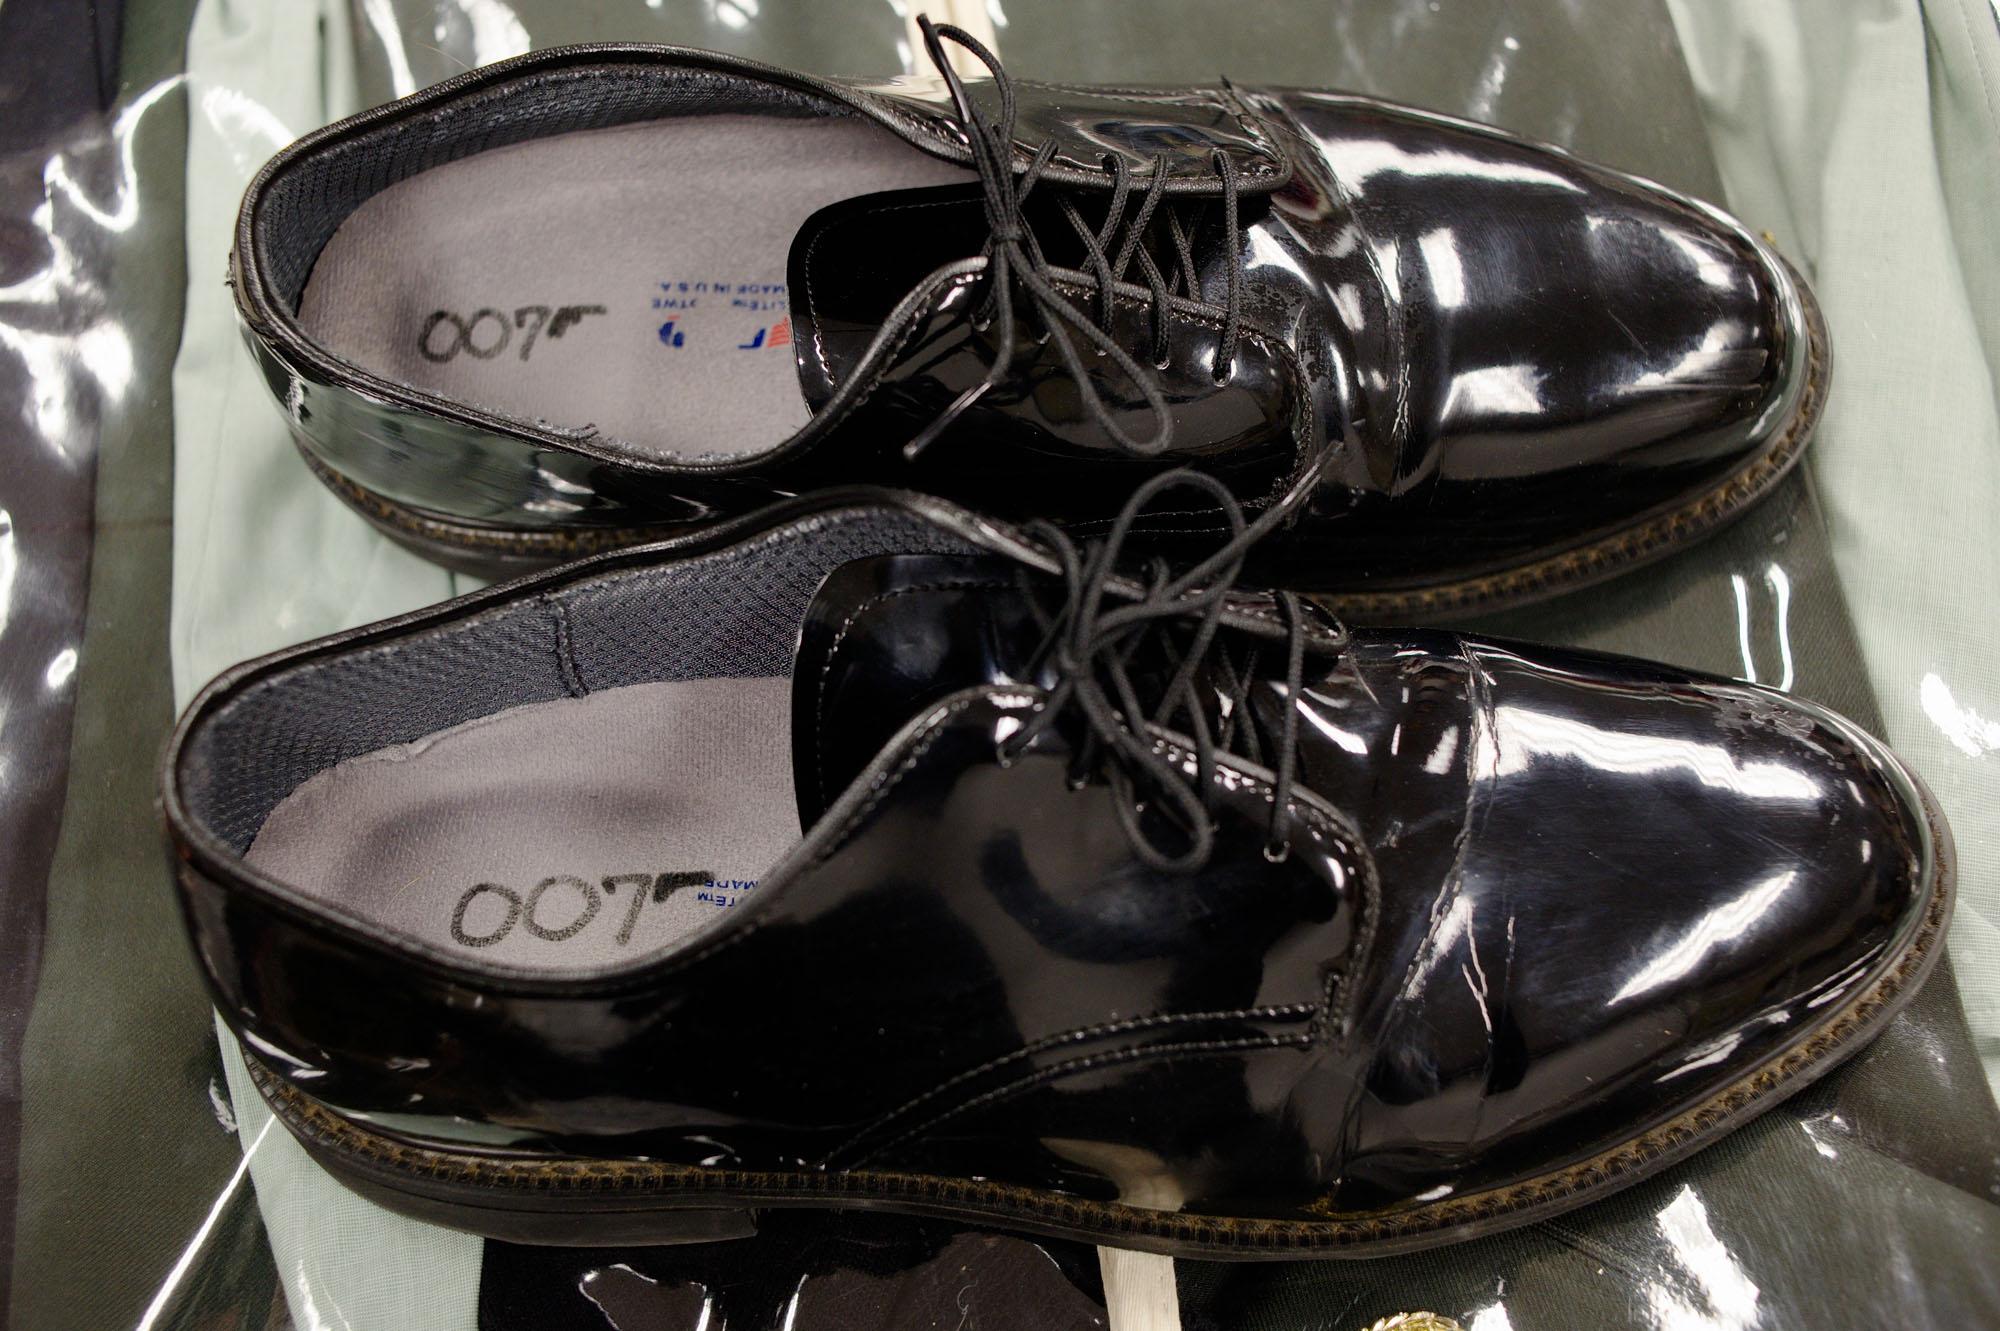 Cadets - Cadets have to mark their initials in their dress shoes...